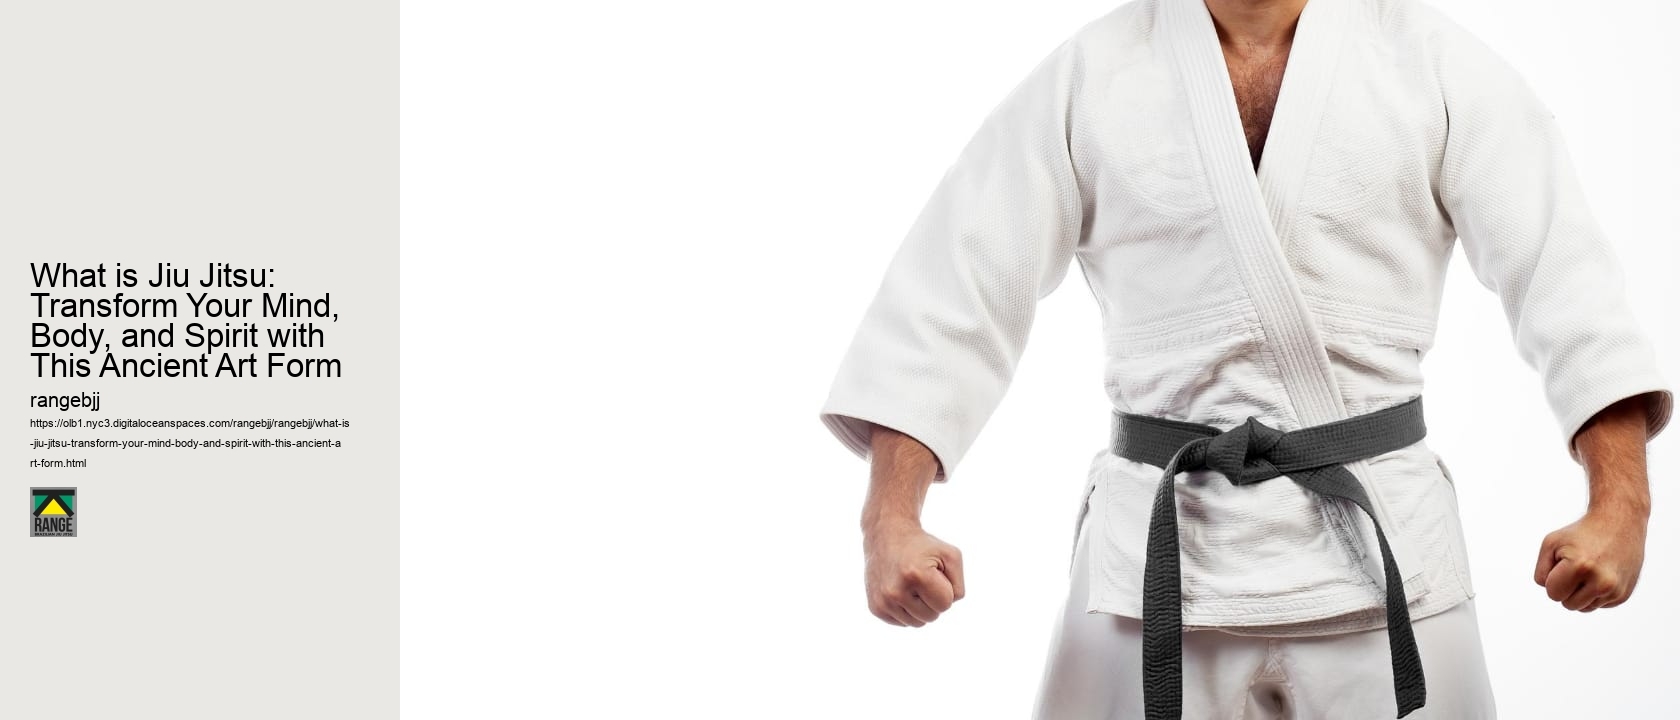 What is Jiu Jitsu: Transform Your Mind, Body, and Spirit with This Ancient Art Form